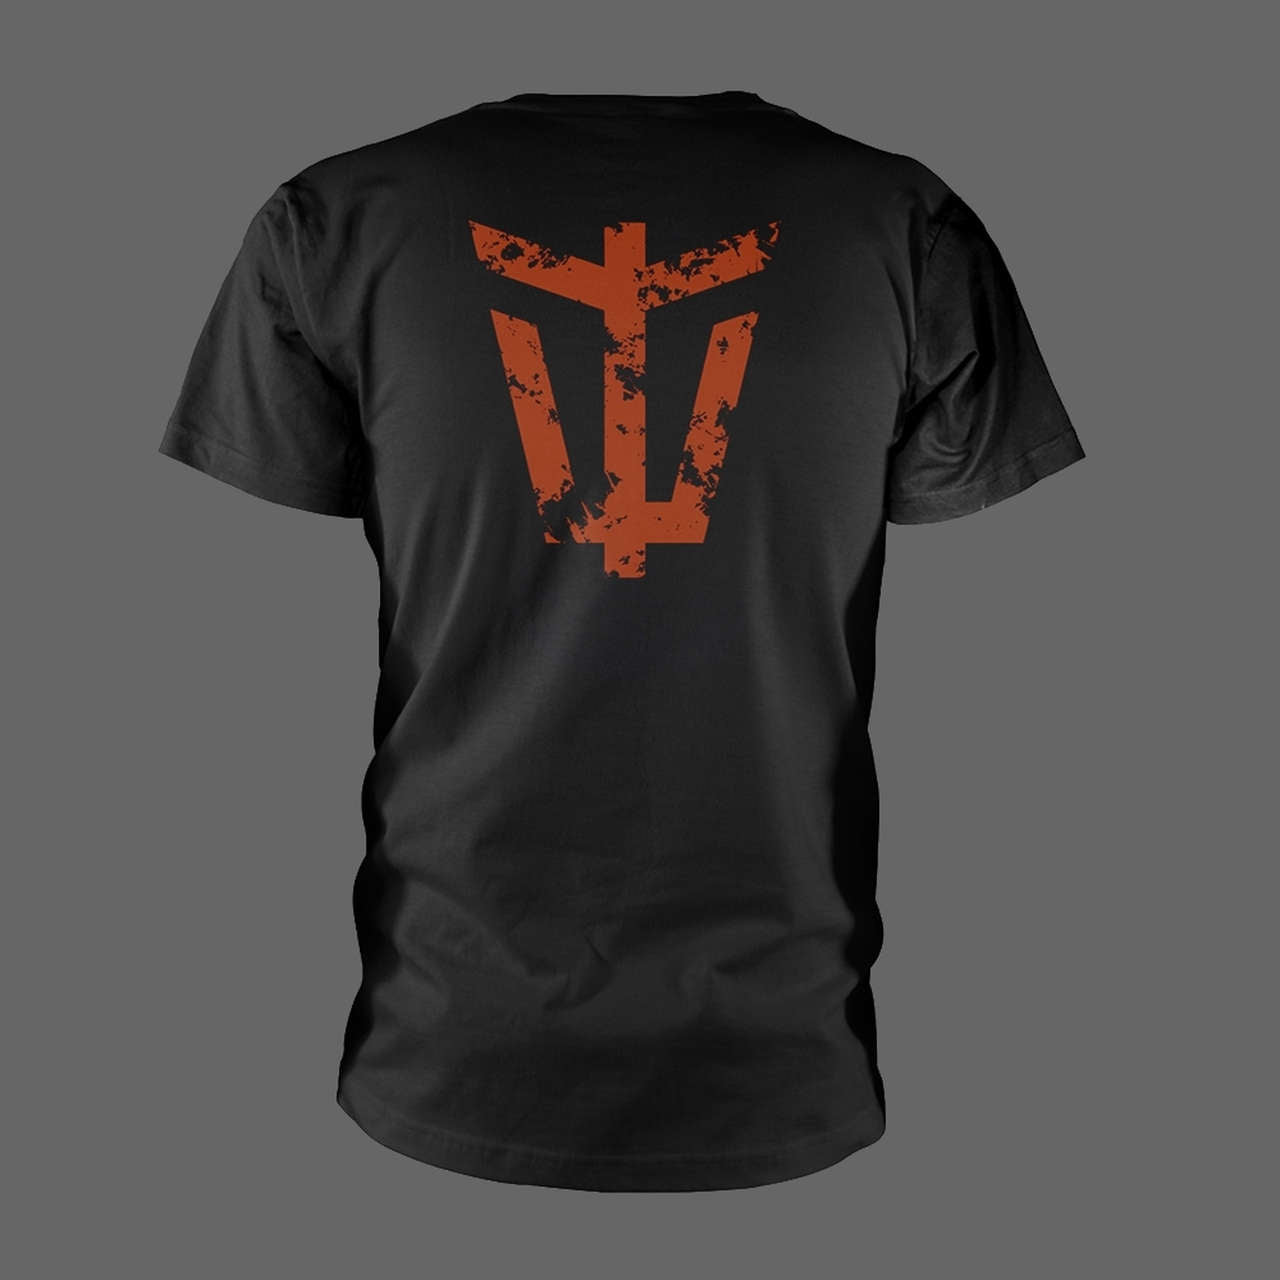 Within Temptation - Bleed Out (T-Shirt)